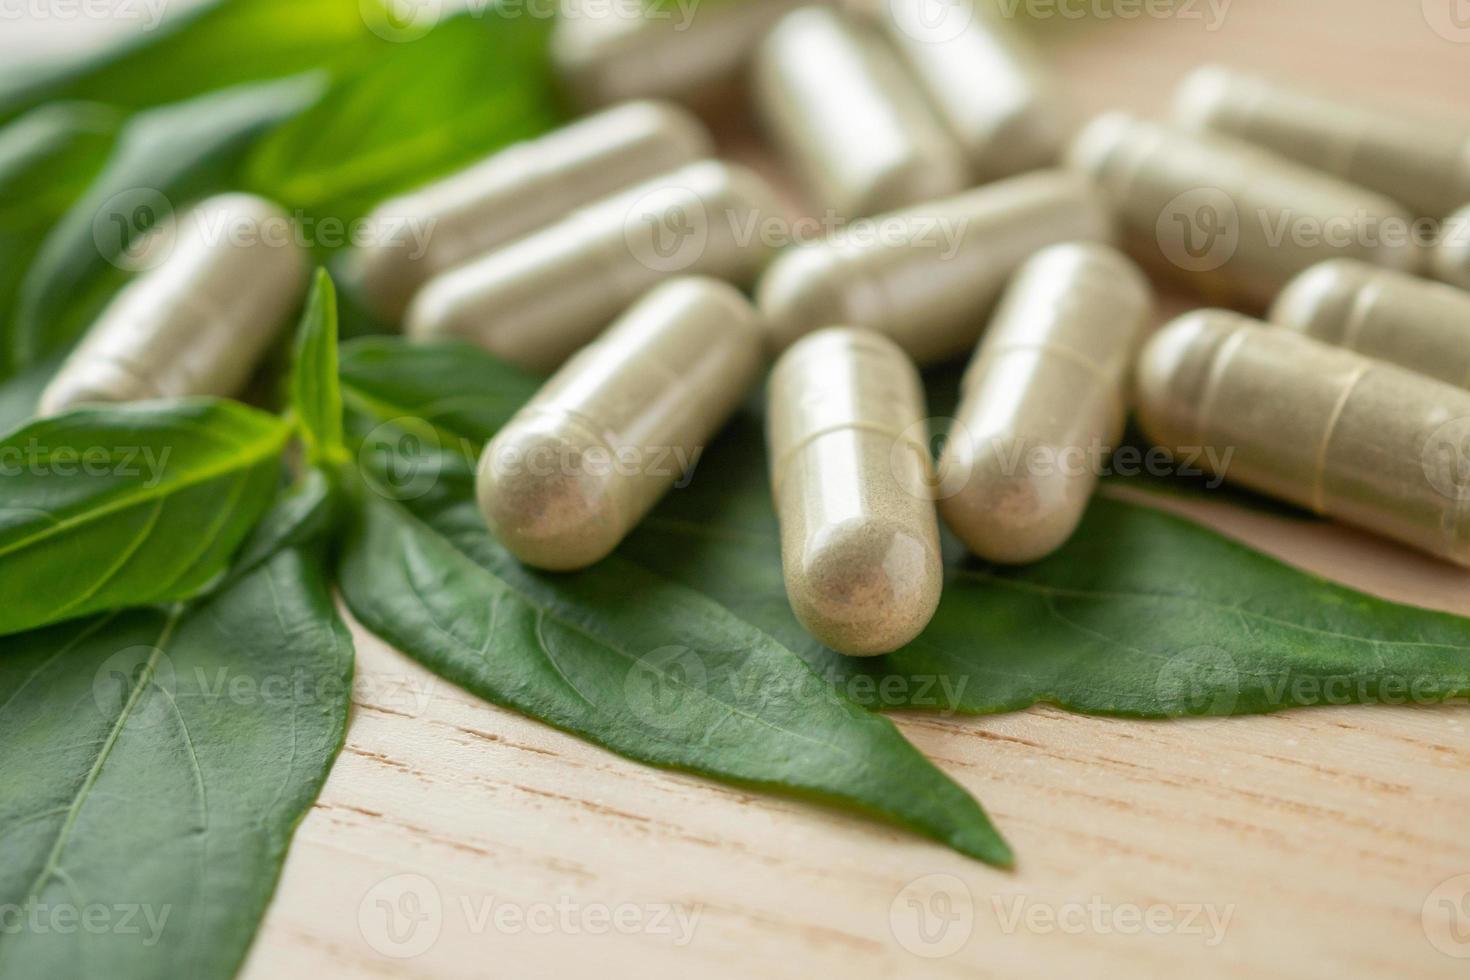 Herbal medicine capsules with Andrographis paniculata leaf on wood table photo